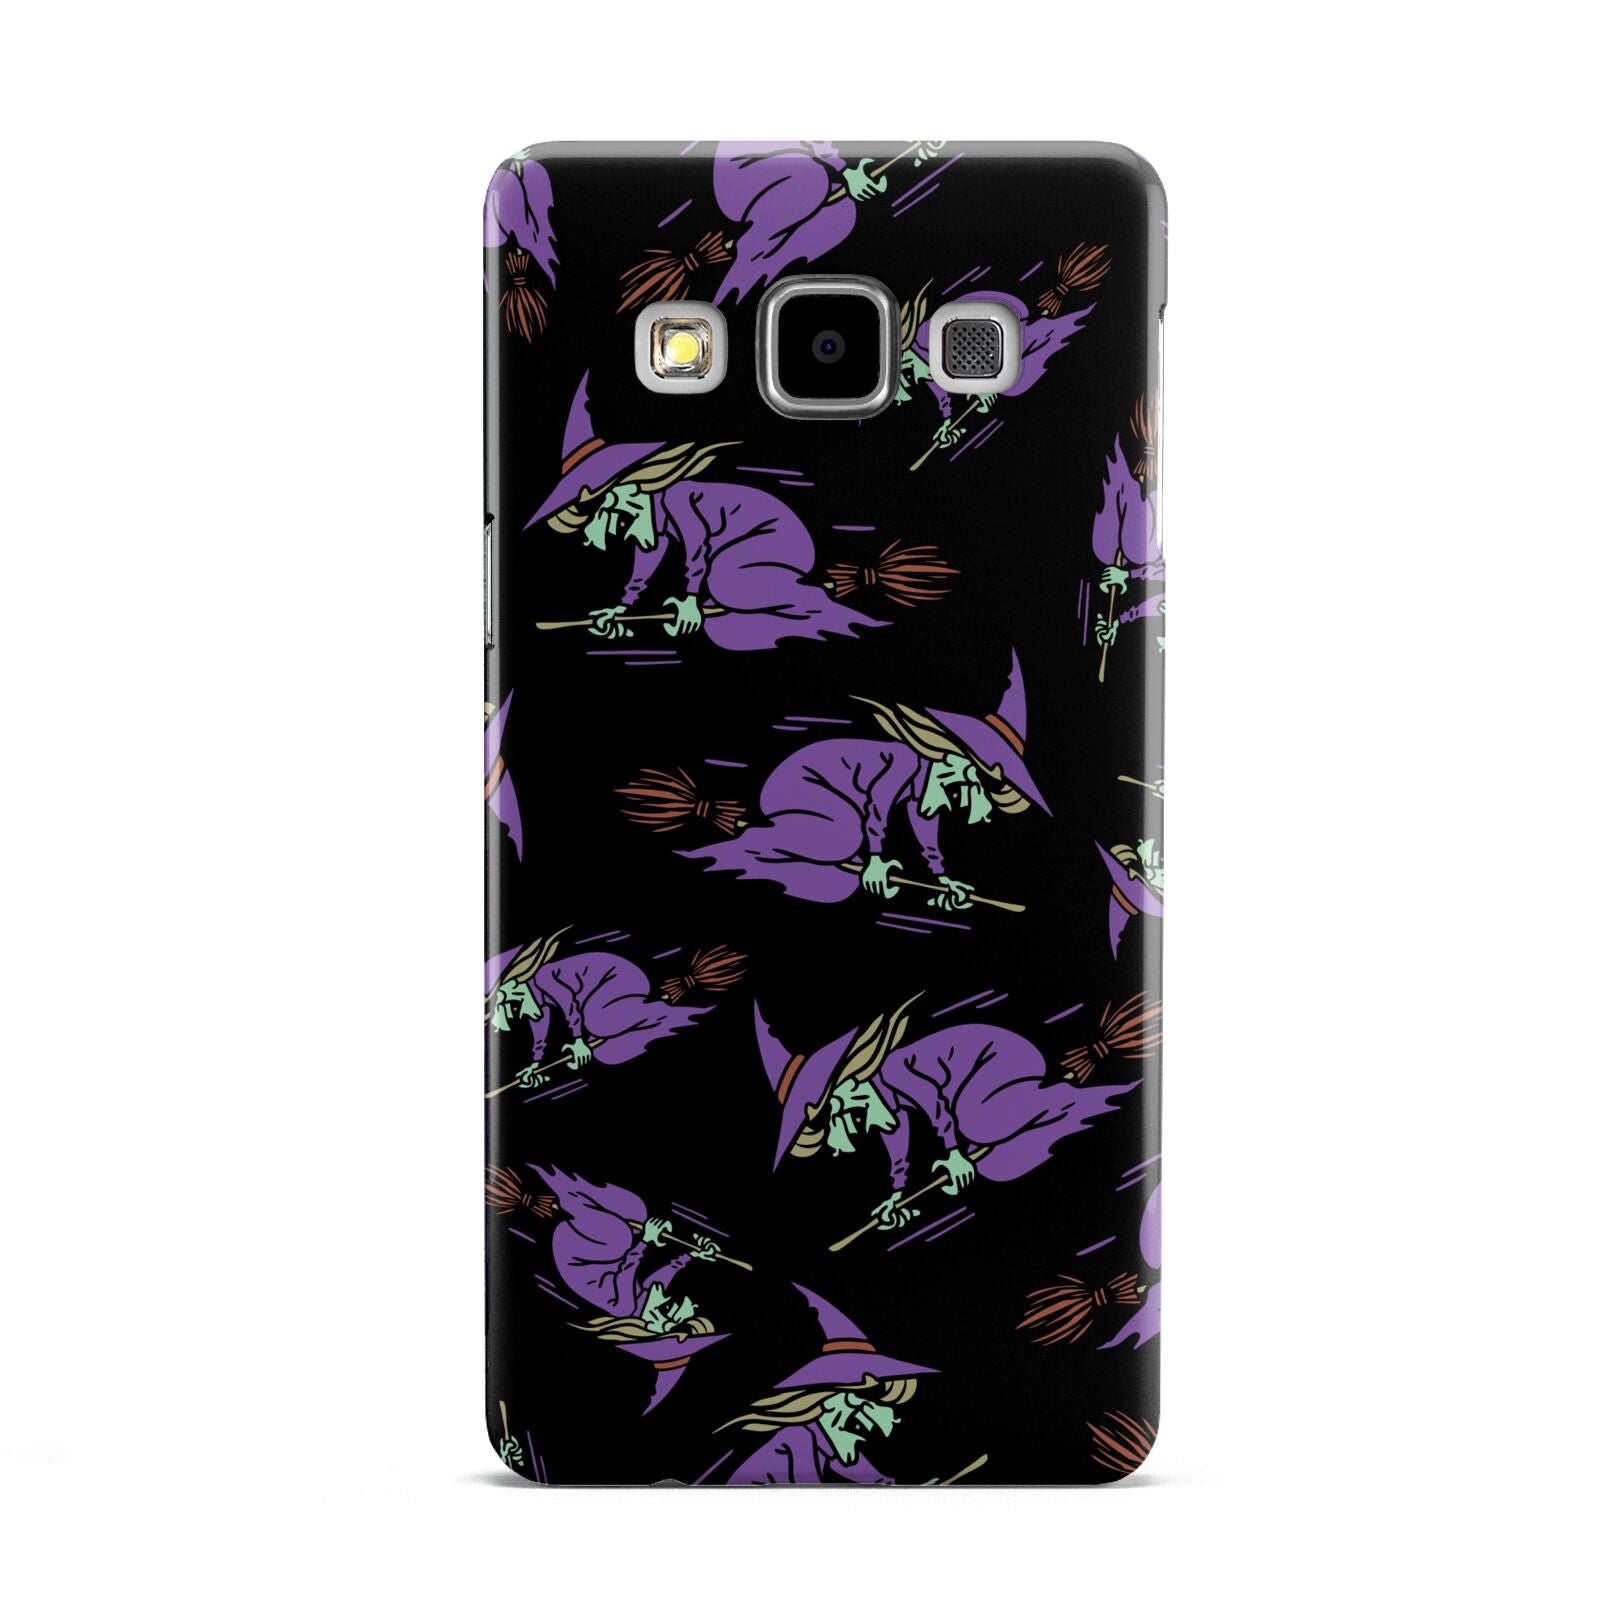 Flying Witches Samsung Galaxy A5 Case